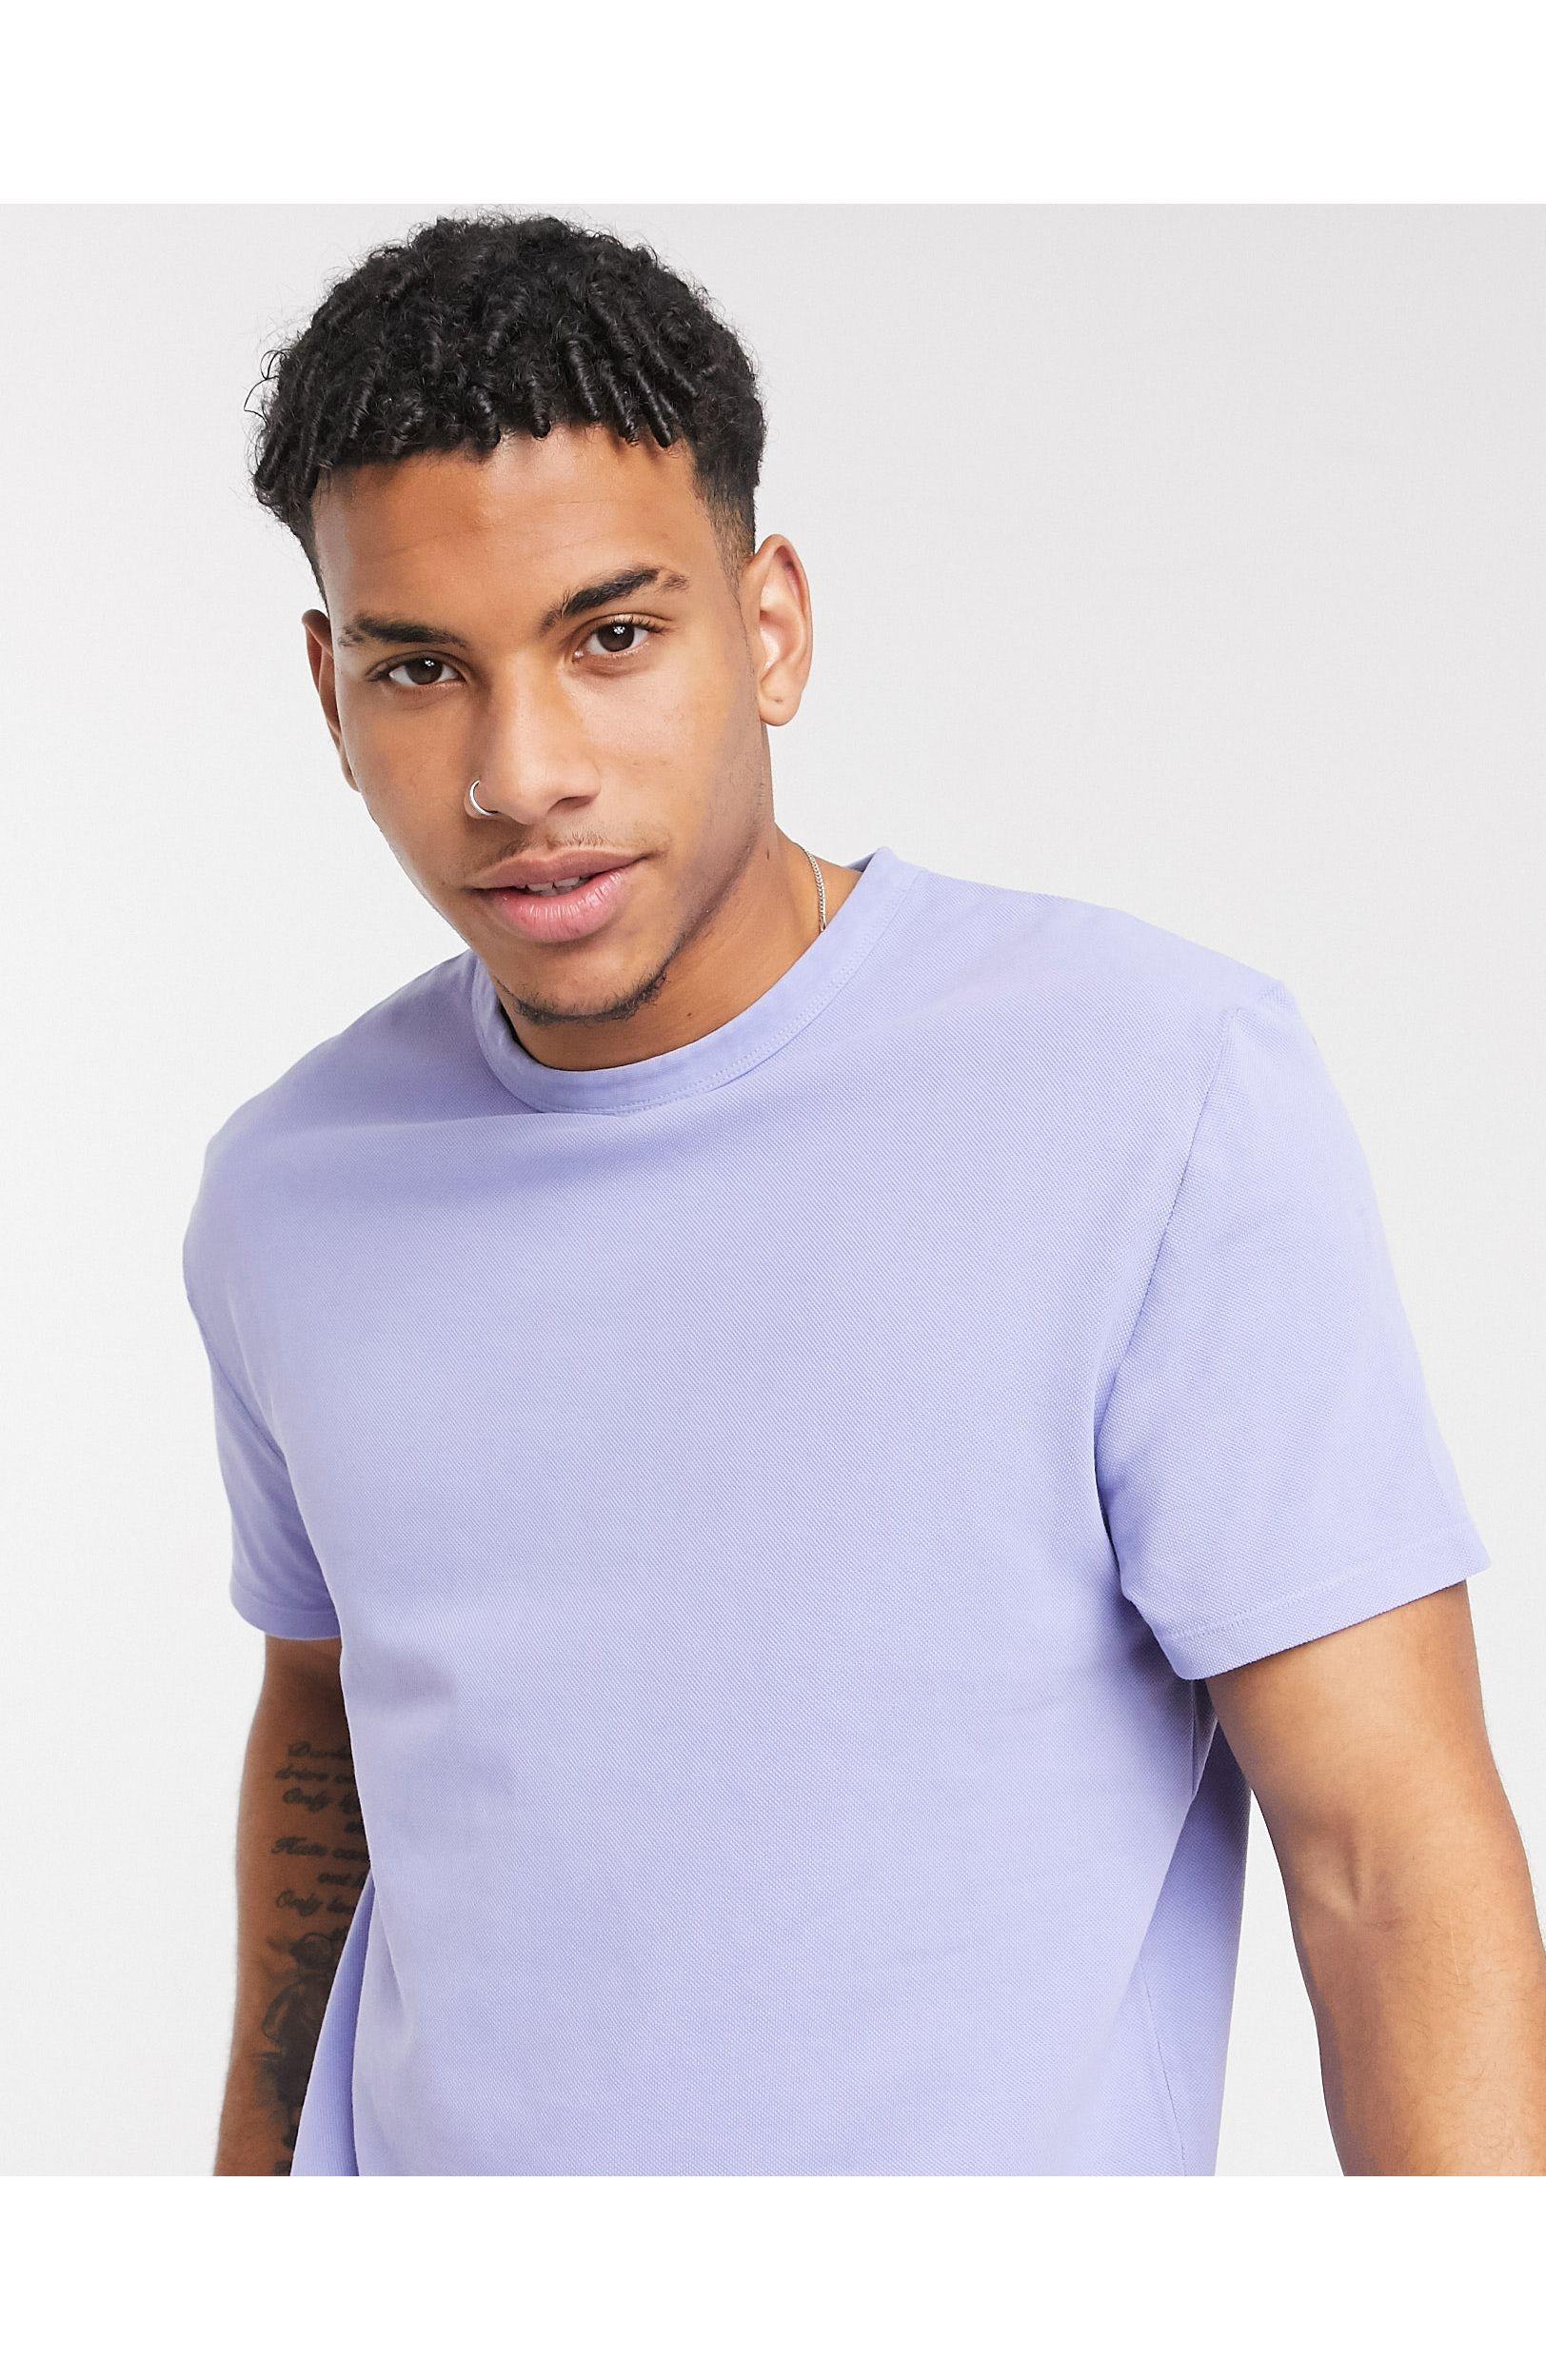 ASOS Relaxed T-shirt in Purple for Men - Lyst